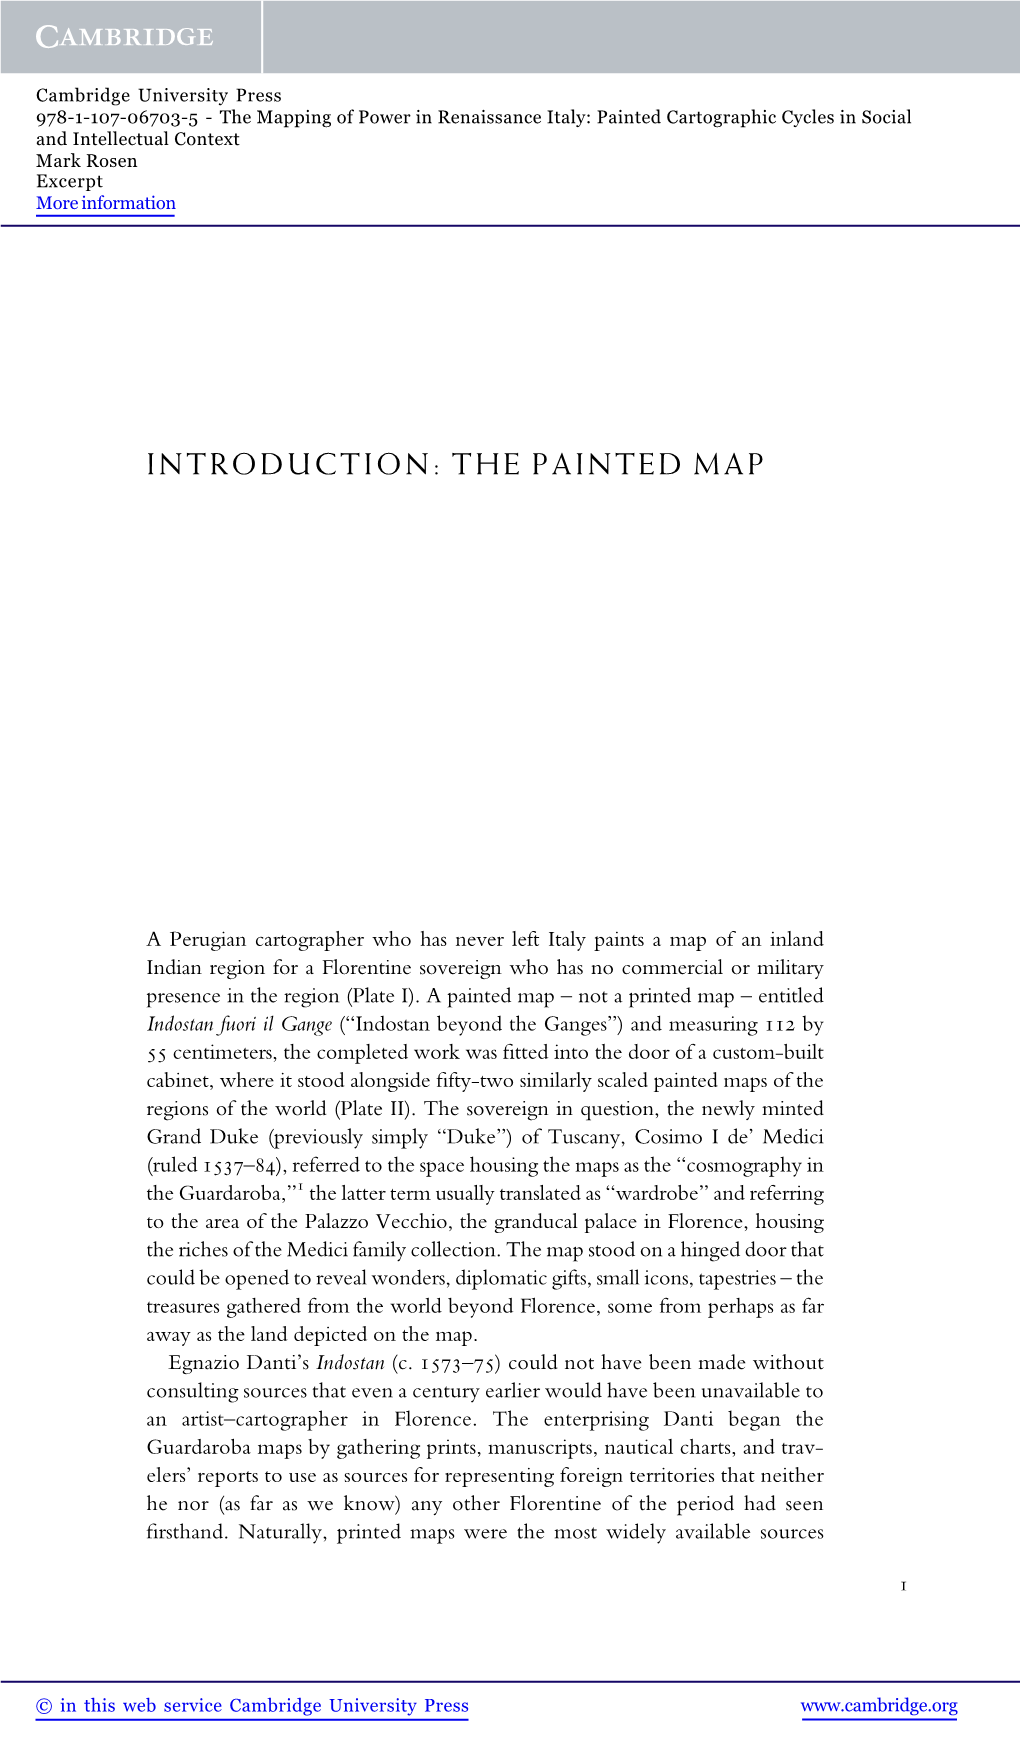 Introduction: the Painted Map